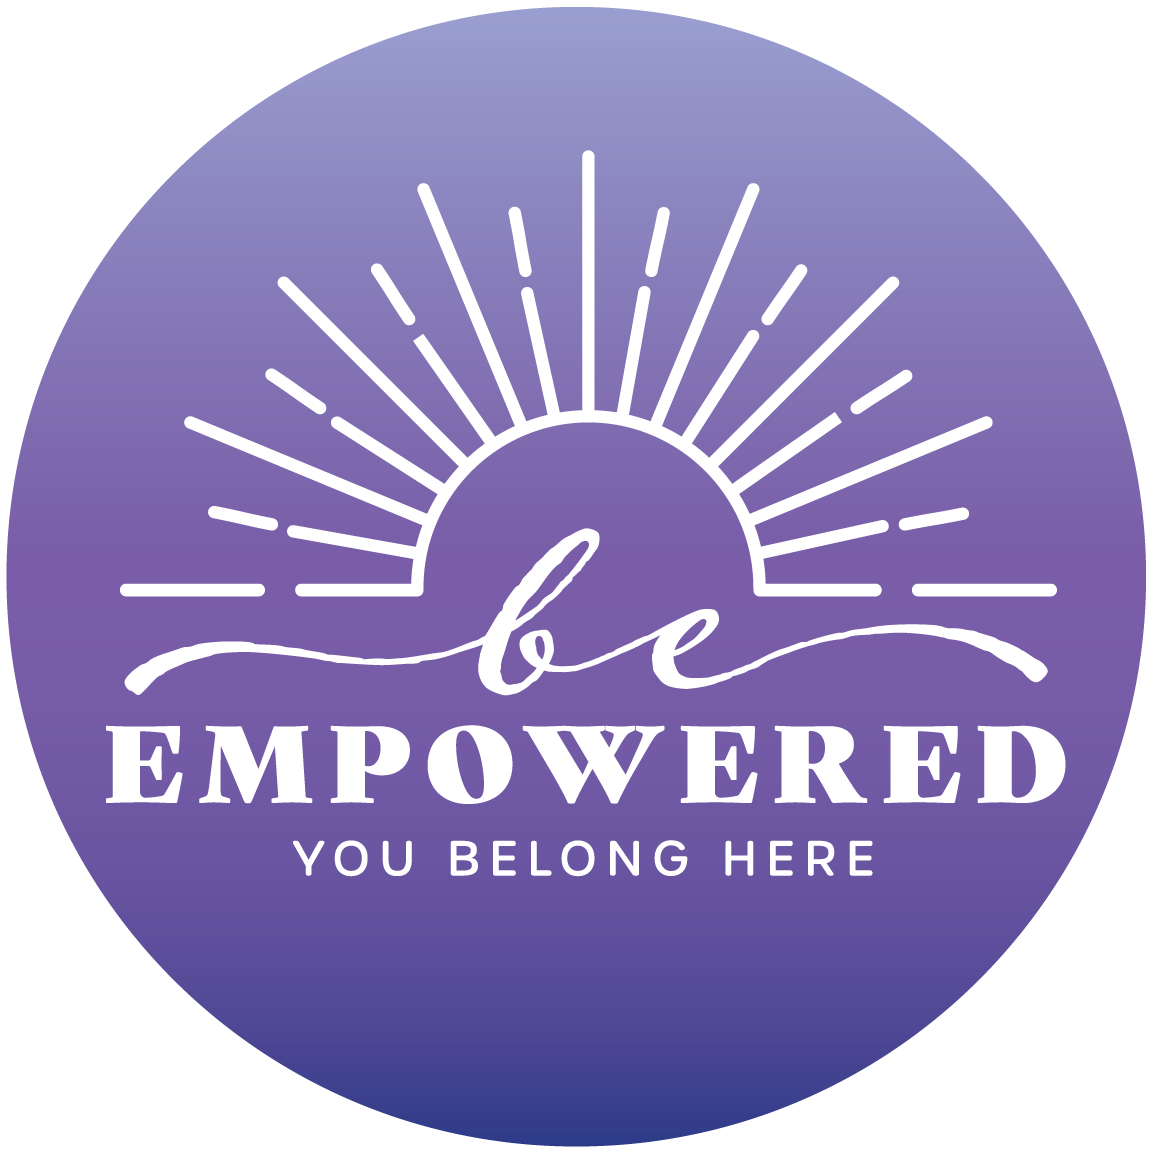 Be Empowered